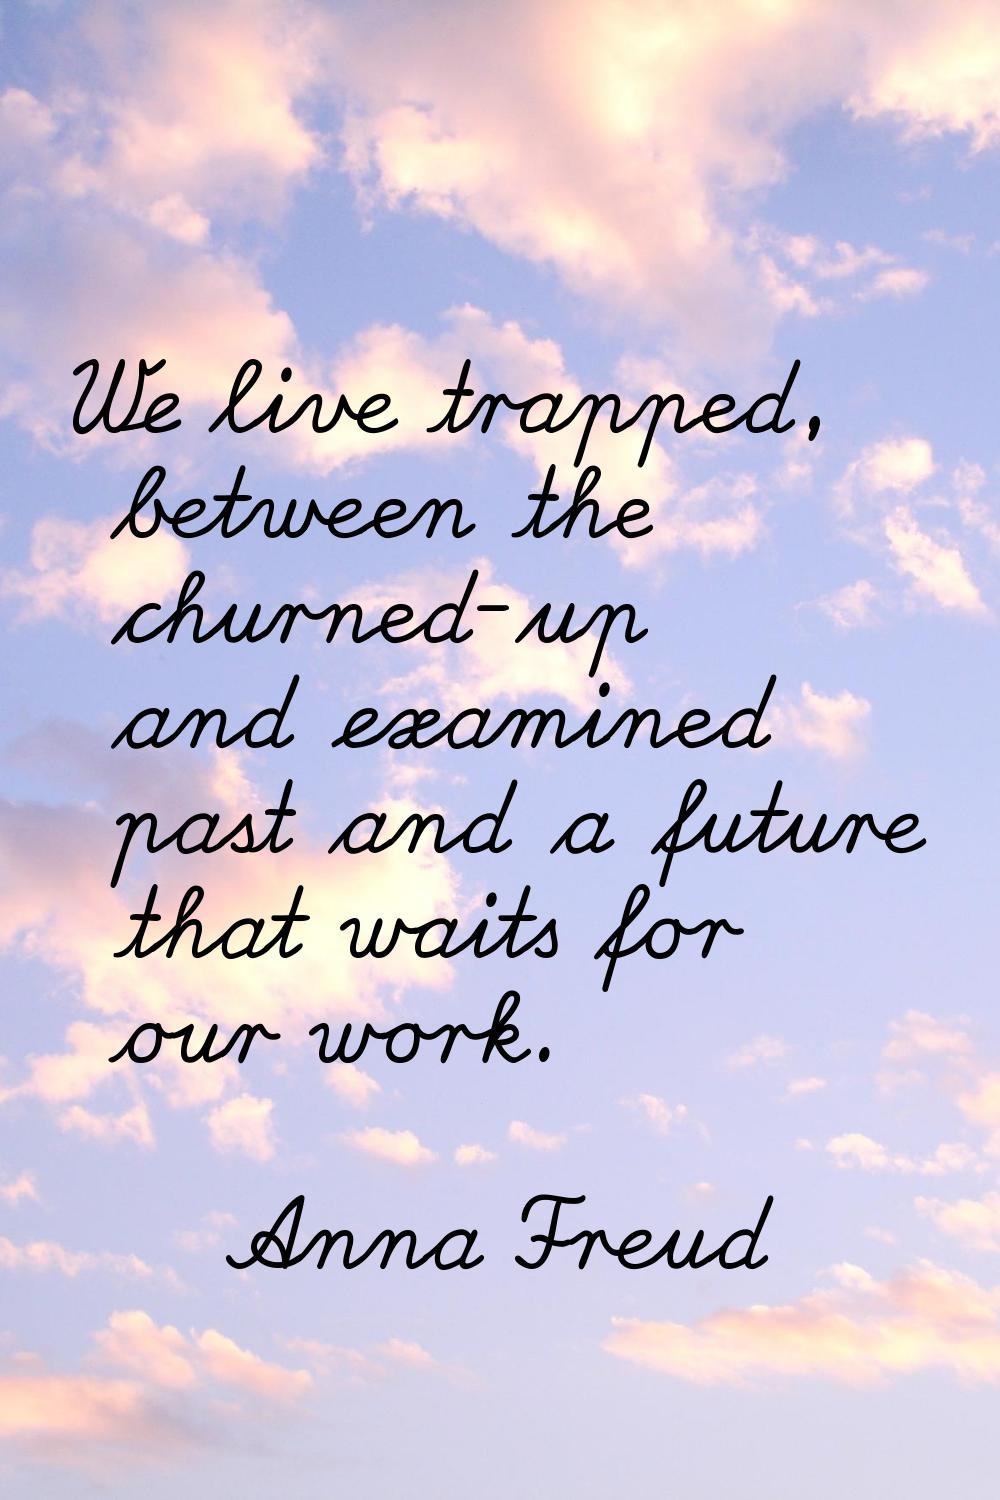 We live trapped, between the churned-up and examined past and a future that waits for our work.